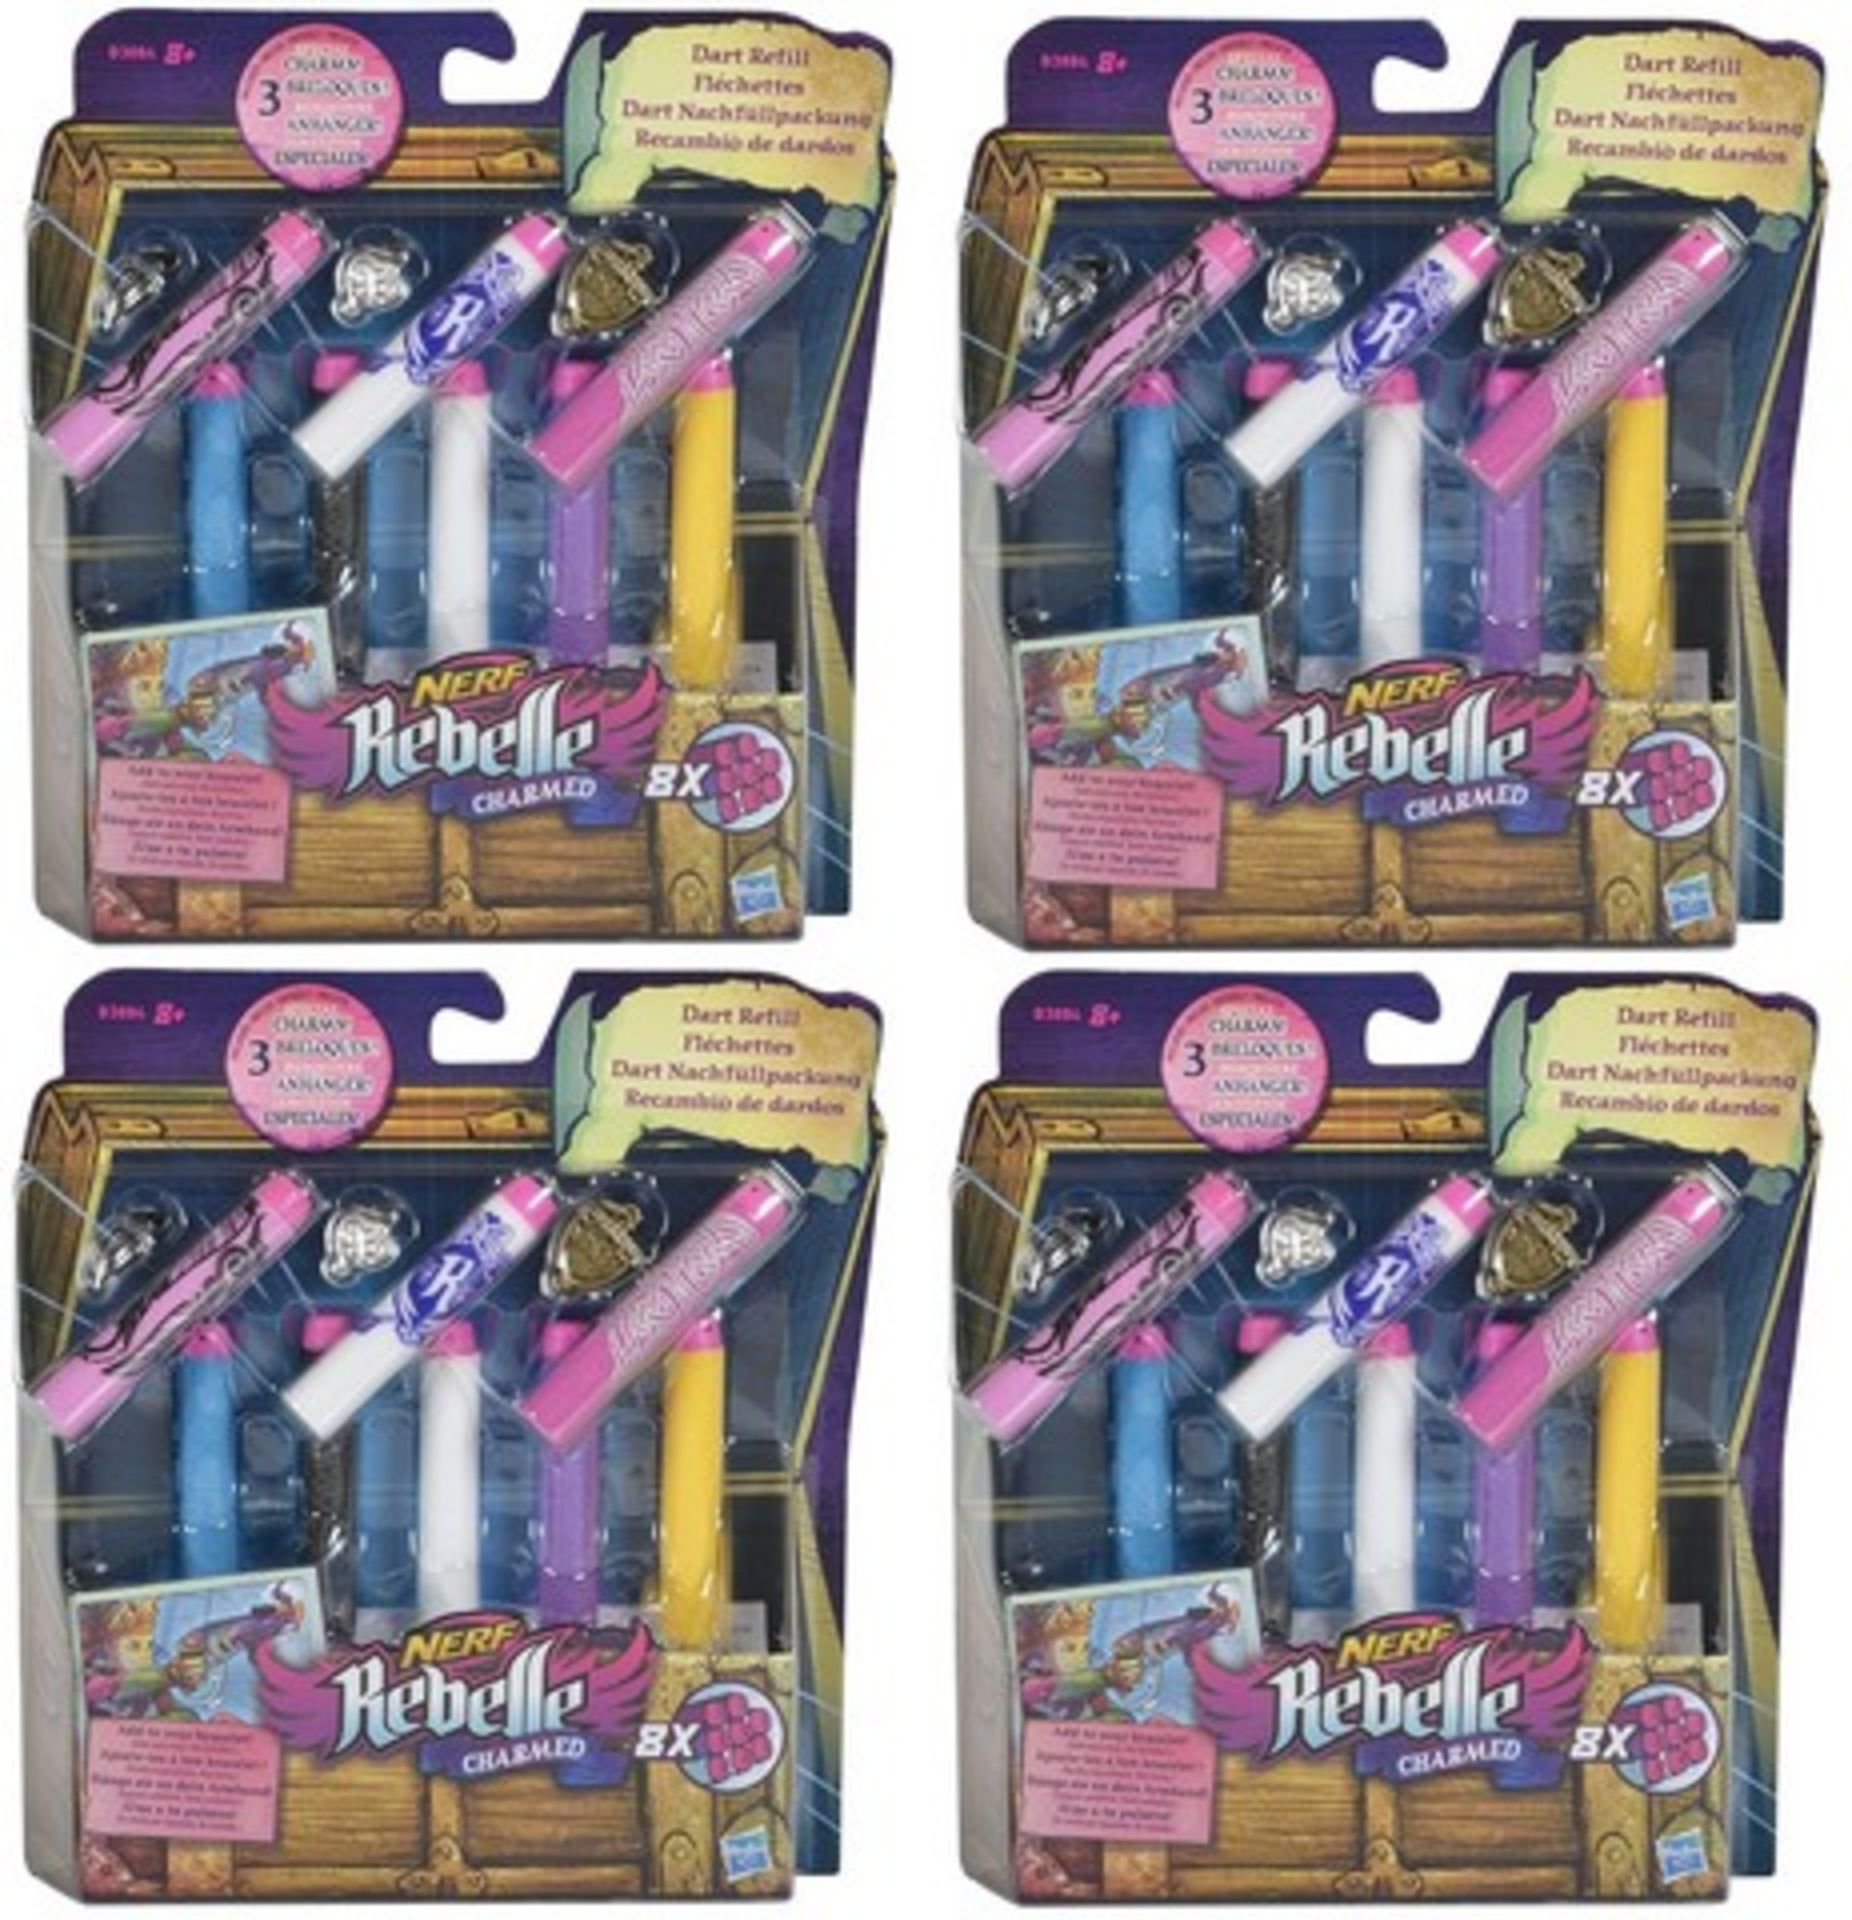 V Brand New 4 Packs Of Nerf Rebelle Charmed 8x Dart Refills With 3 Charms For Your Bracelet - RRP - Image 2 of 2